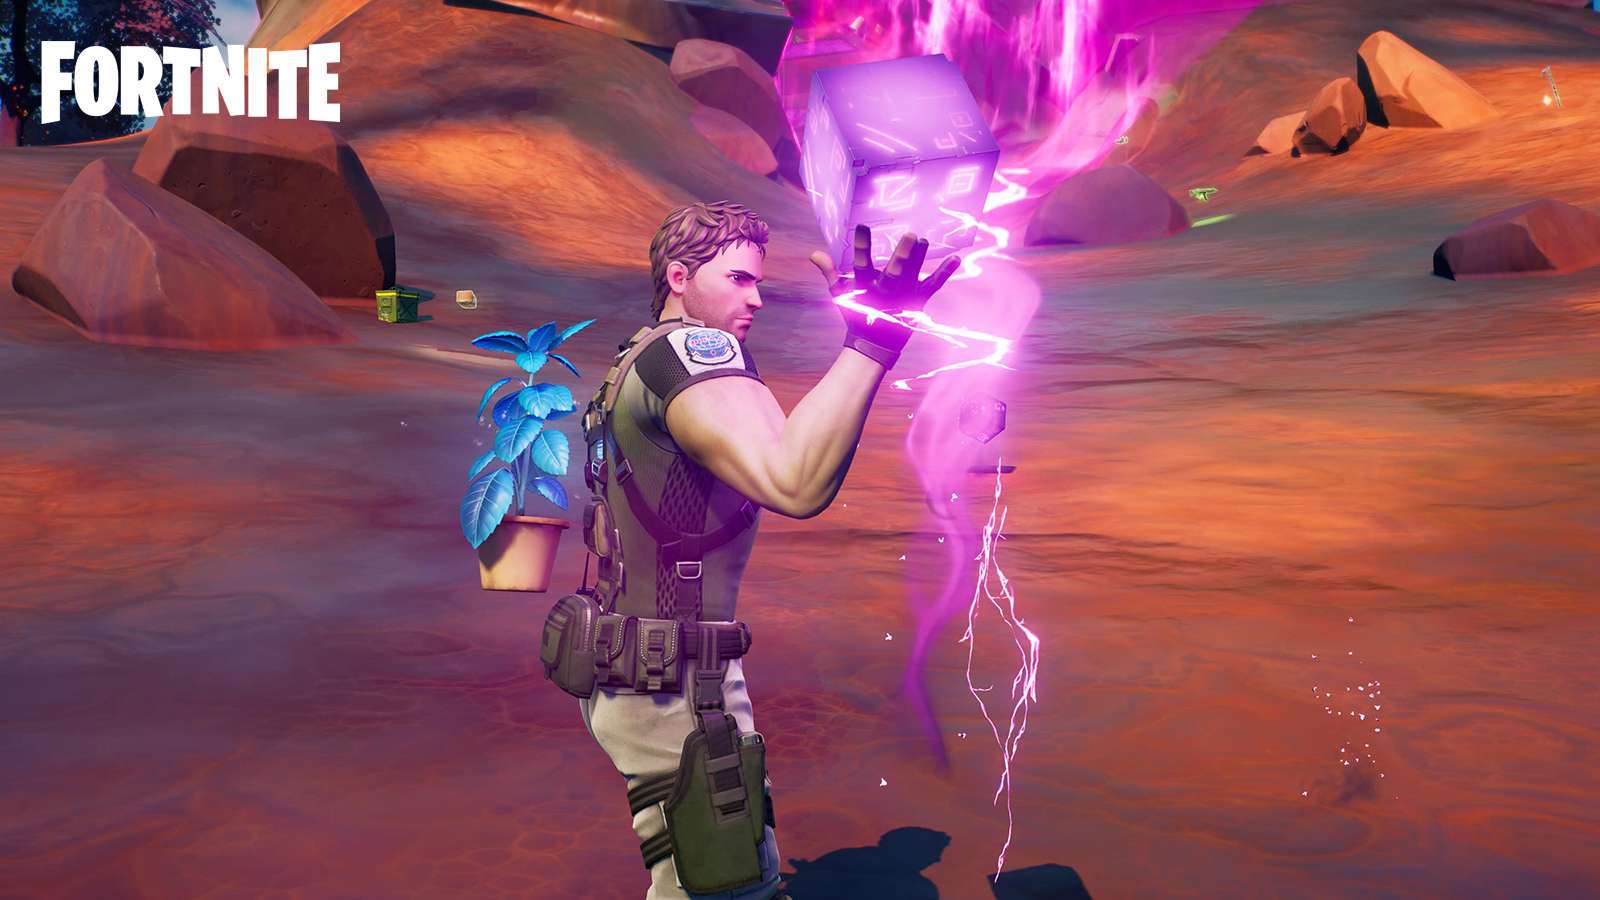 Chris Redfield consuming a Shadow Stone in Fortnite